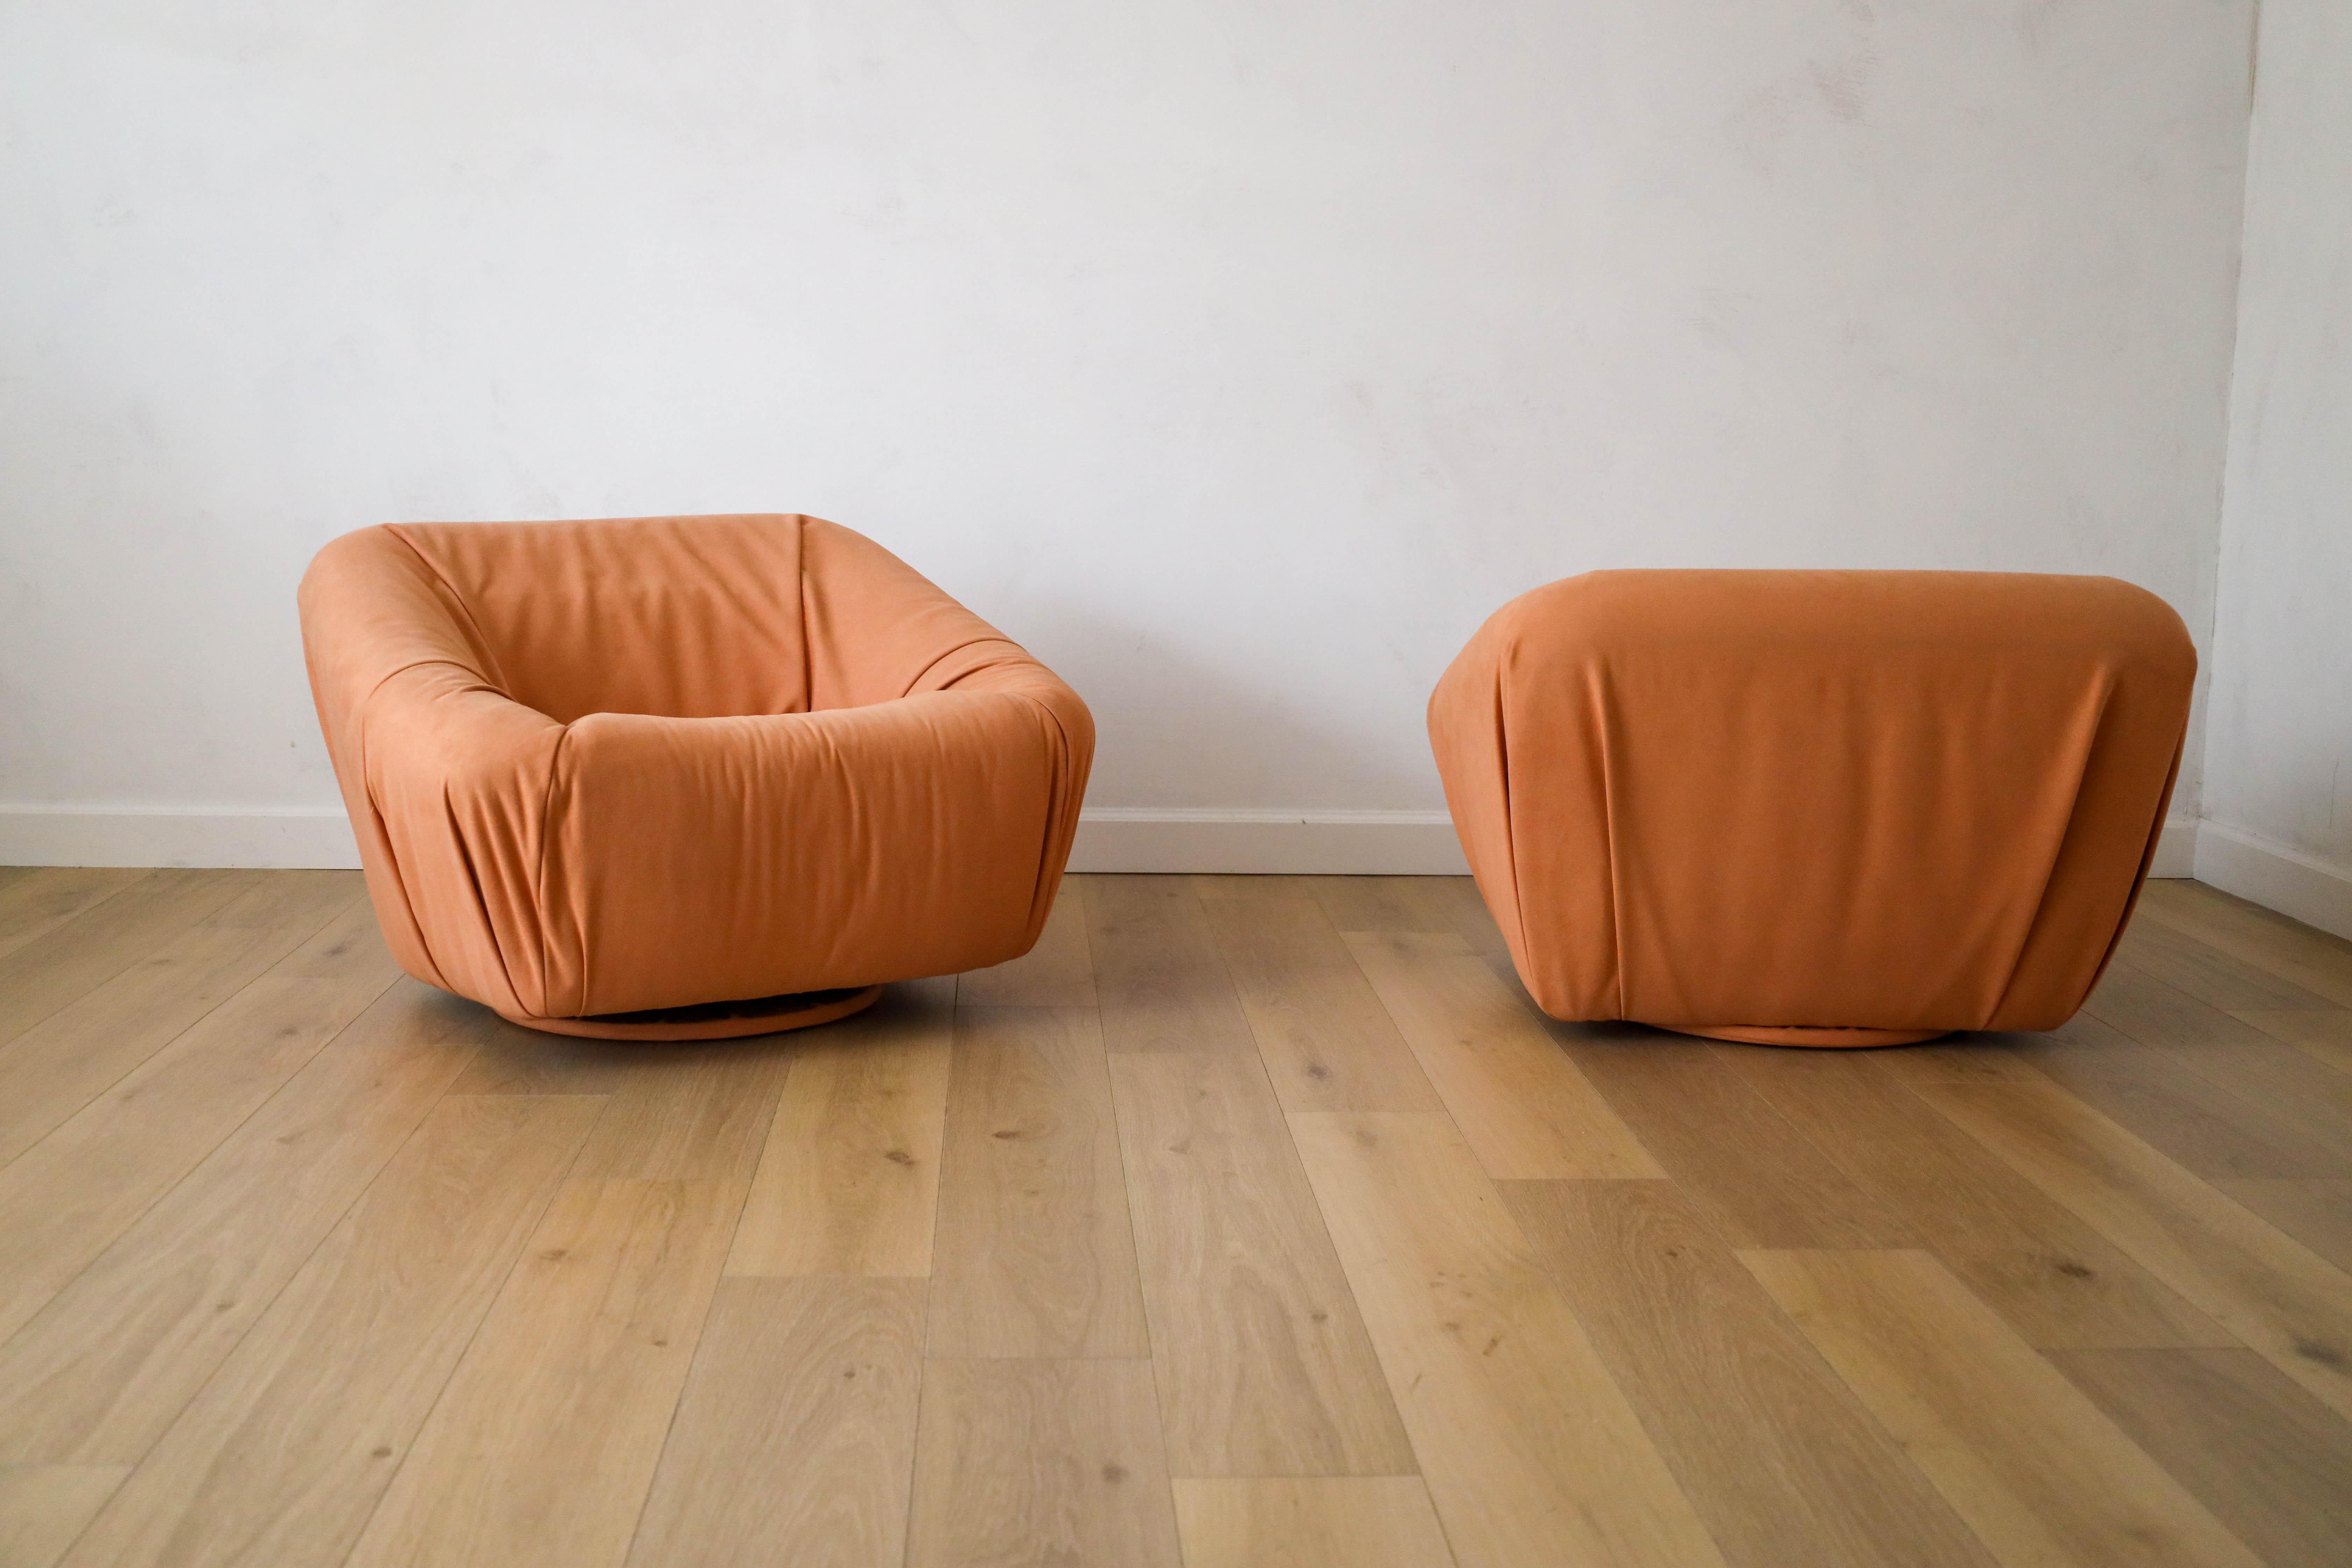 20th Century Vintage Pair 1950s European Swivel Chairs, Suede upholstery by The Romo Group For Sale